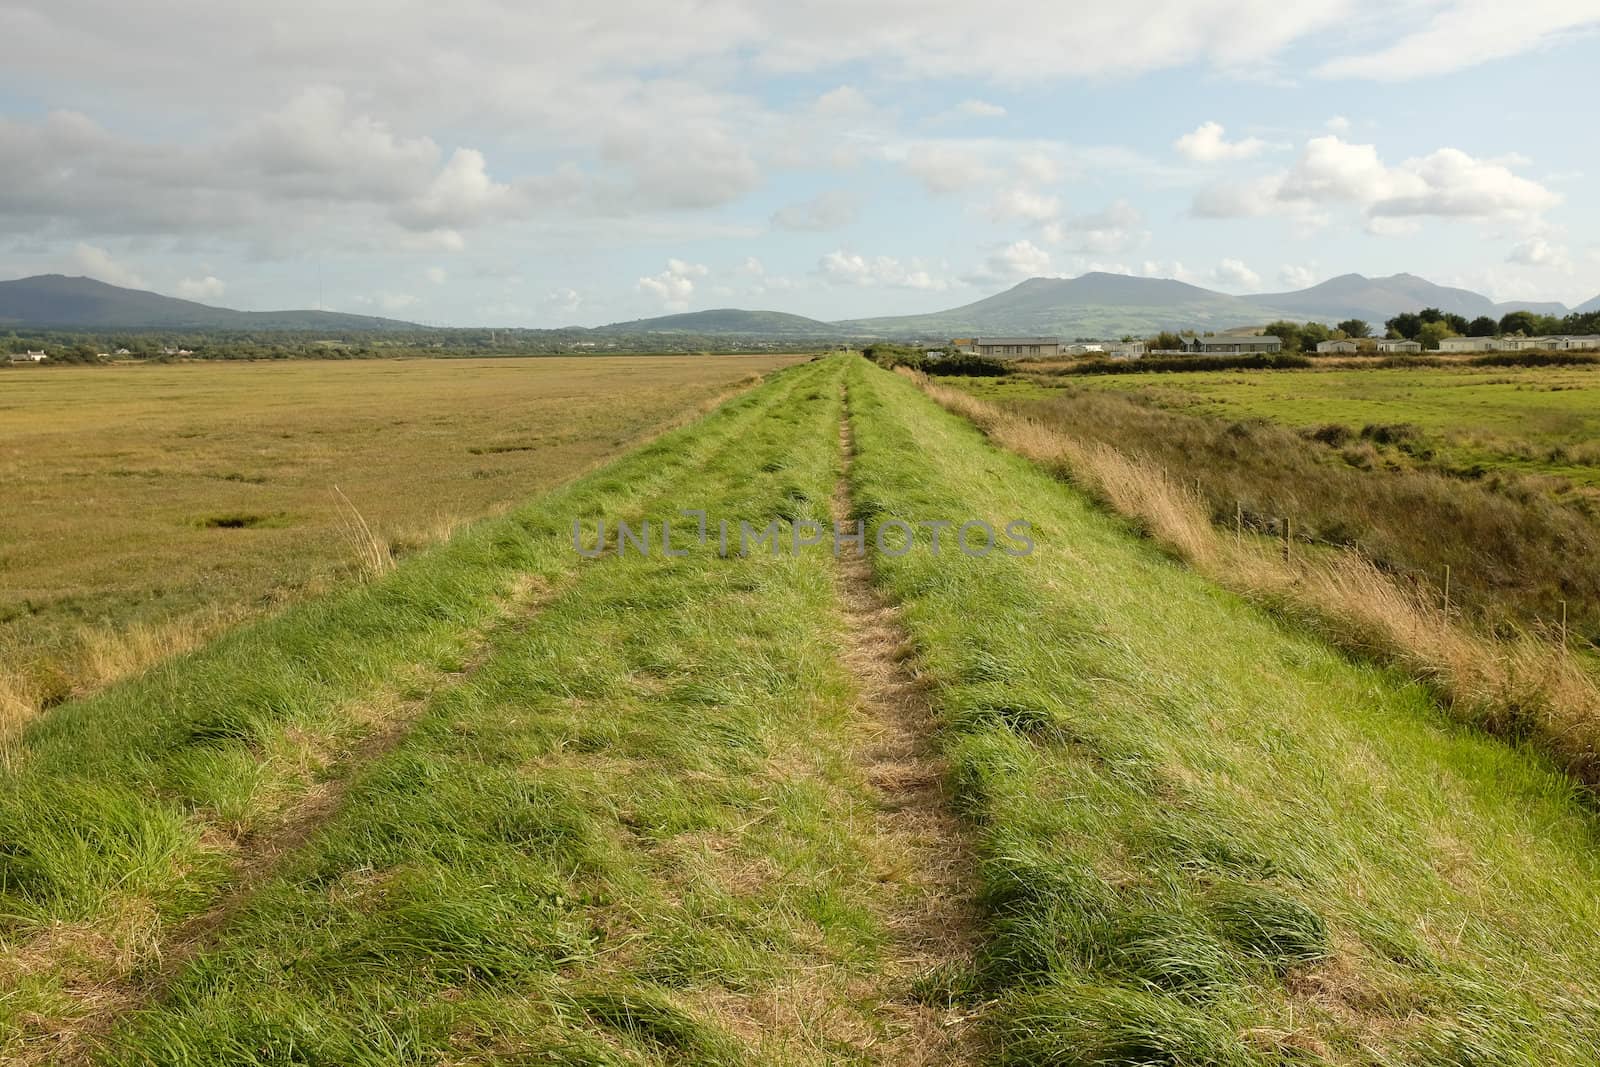 Lush green grass and a track on a dyke running through marshland with a blue cloudy sky and mountains in the distance.